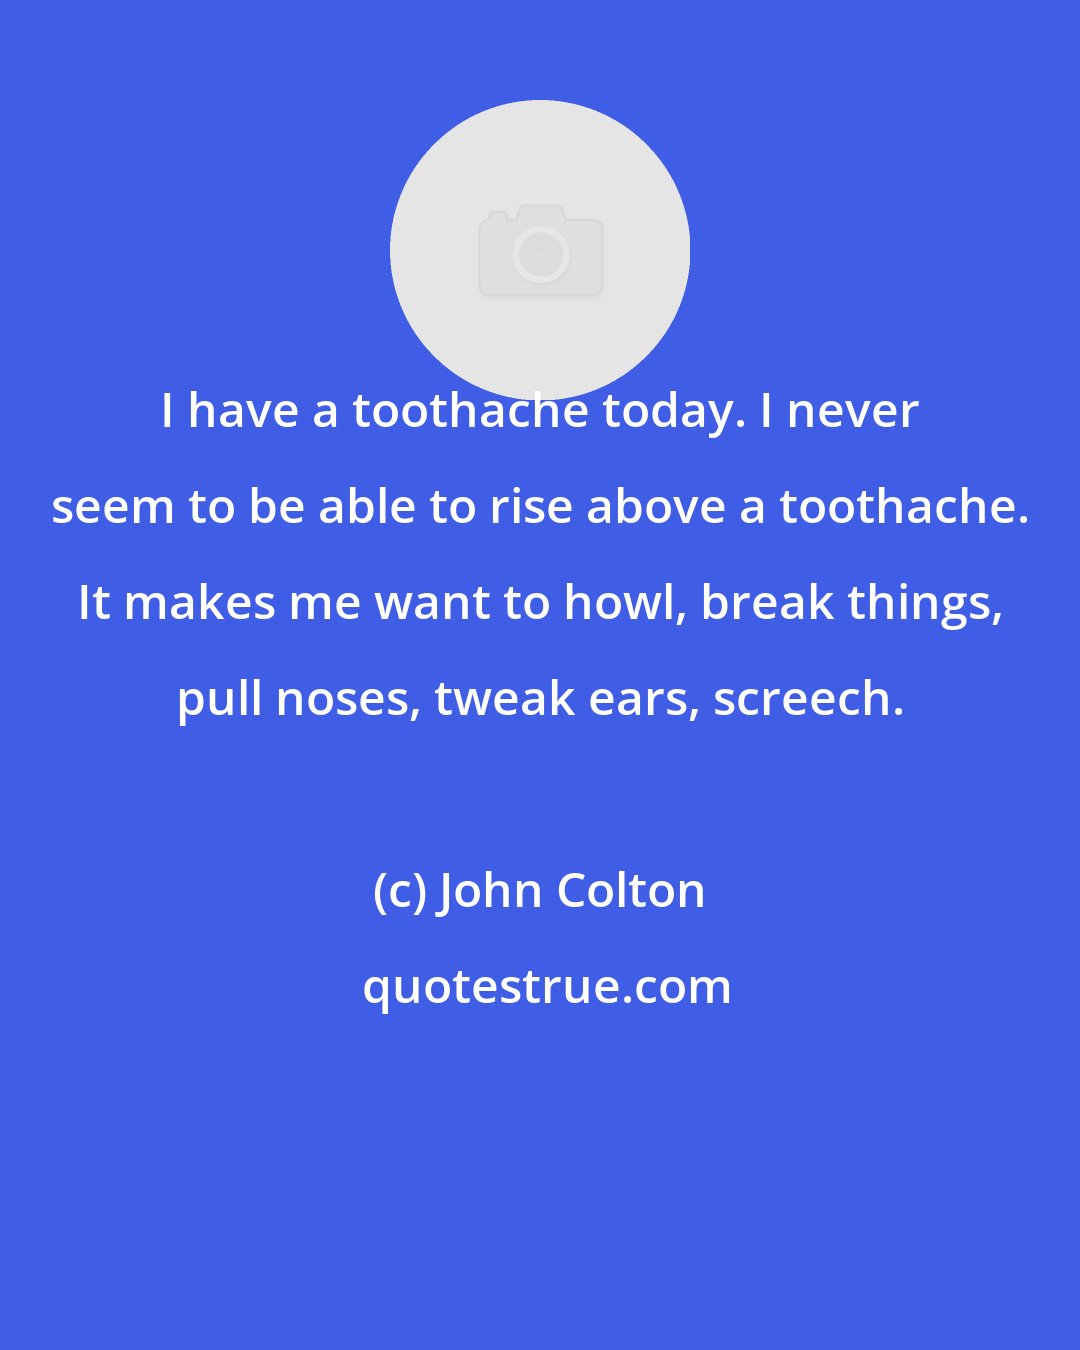 John Colton: I have a toothache today. I never seem to be able to rise above a toothache. It makes me want to howl, break things, pull noses, tweak ears, screech.